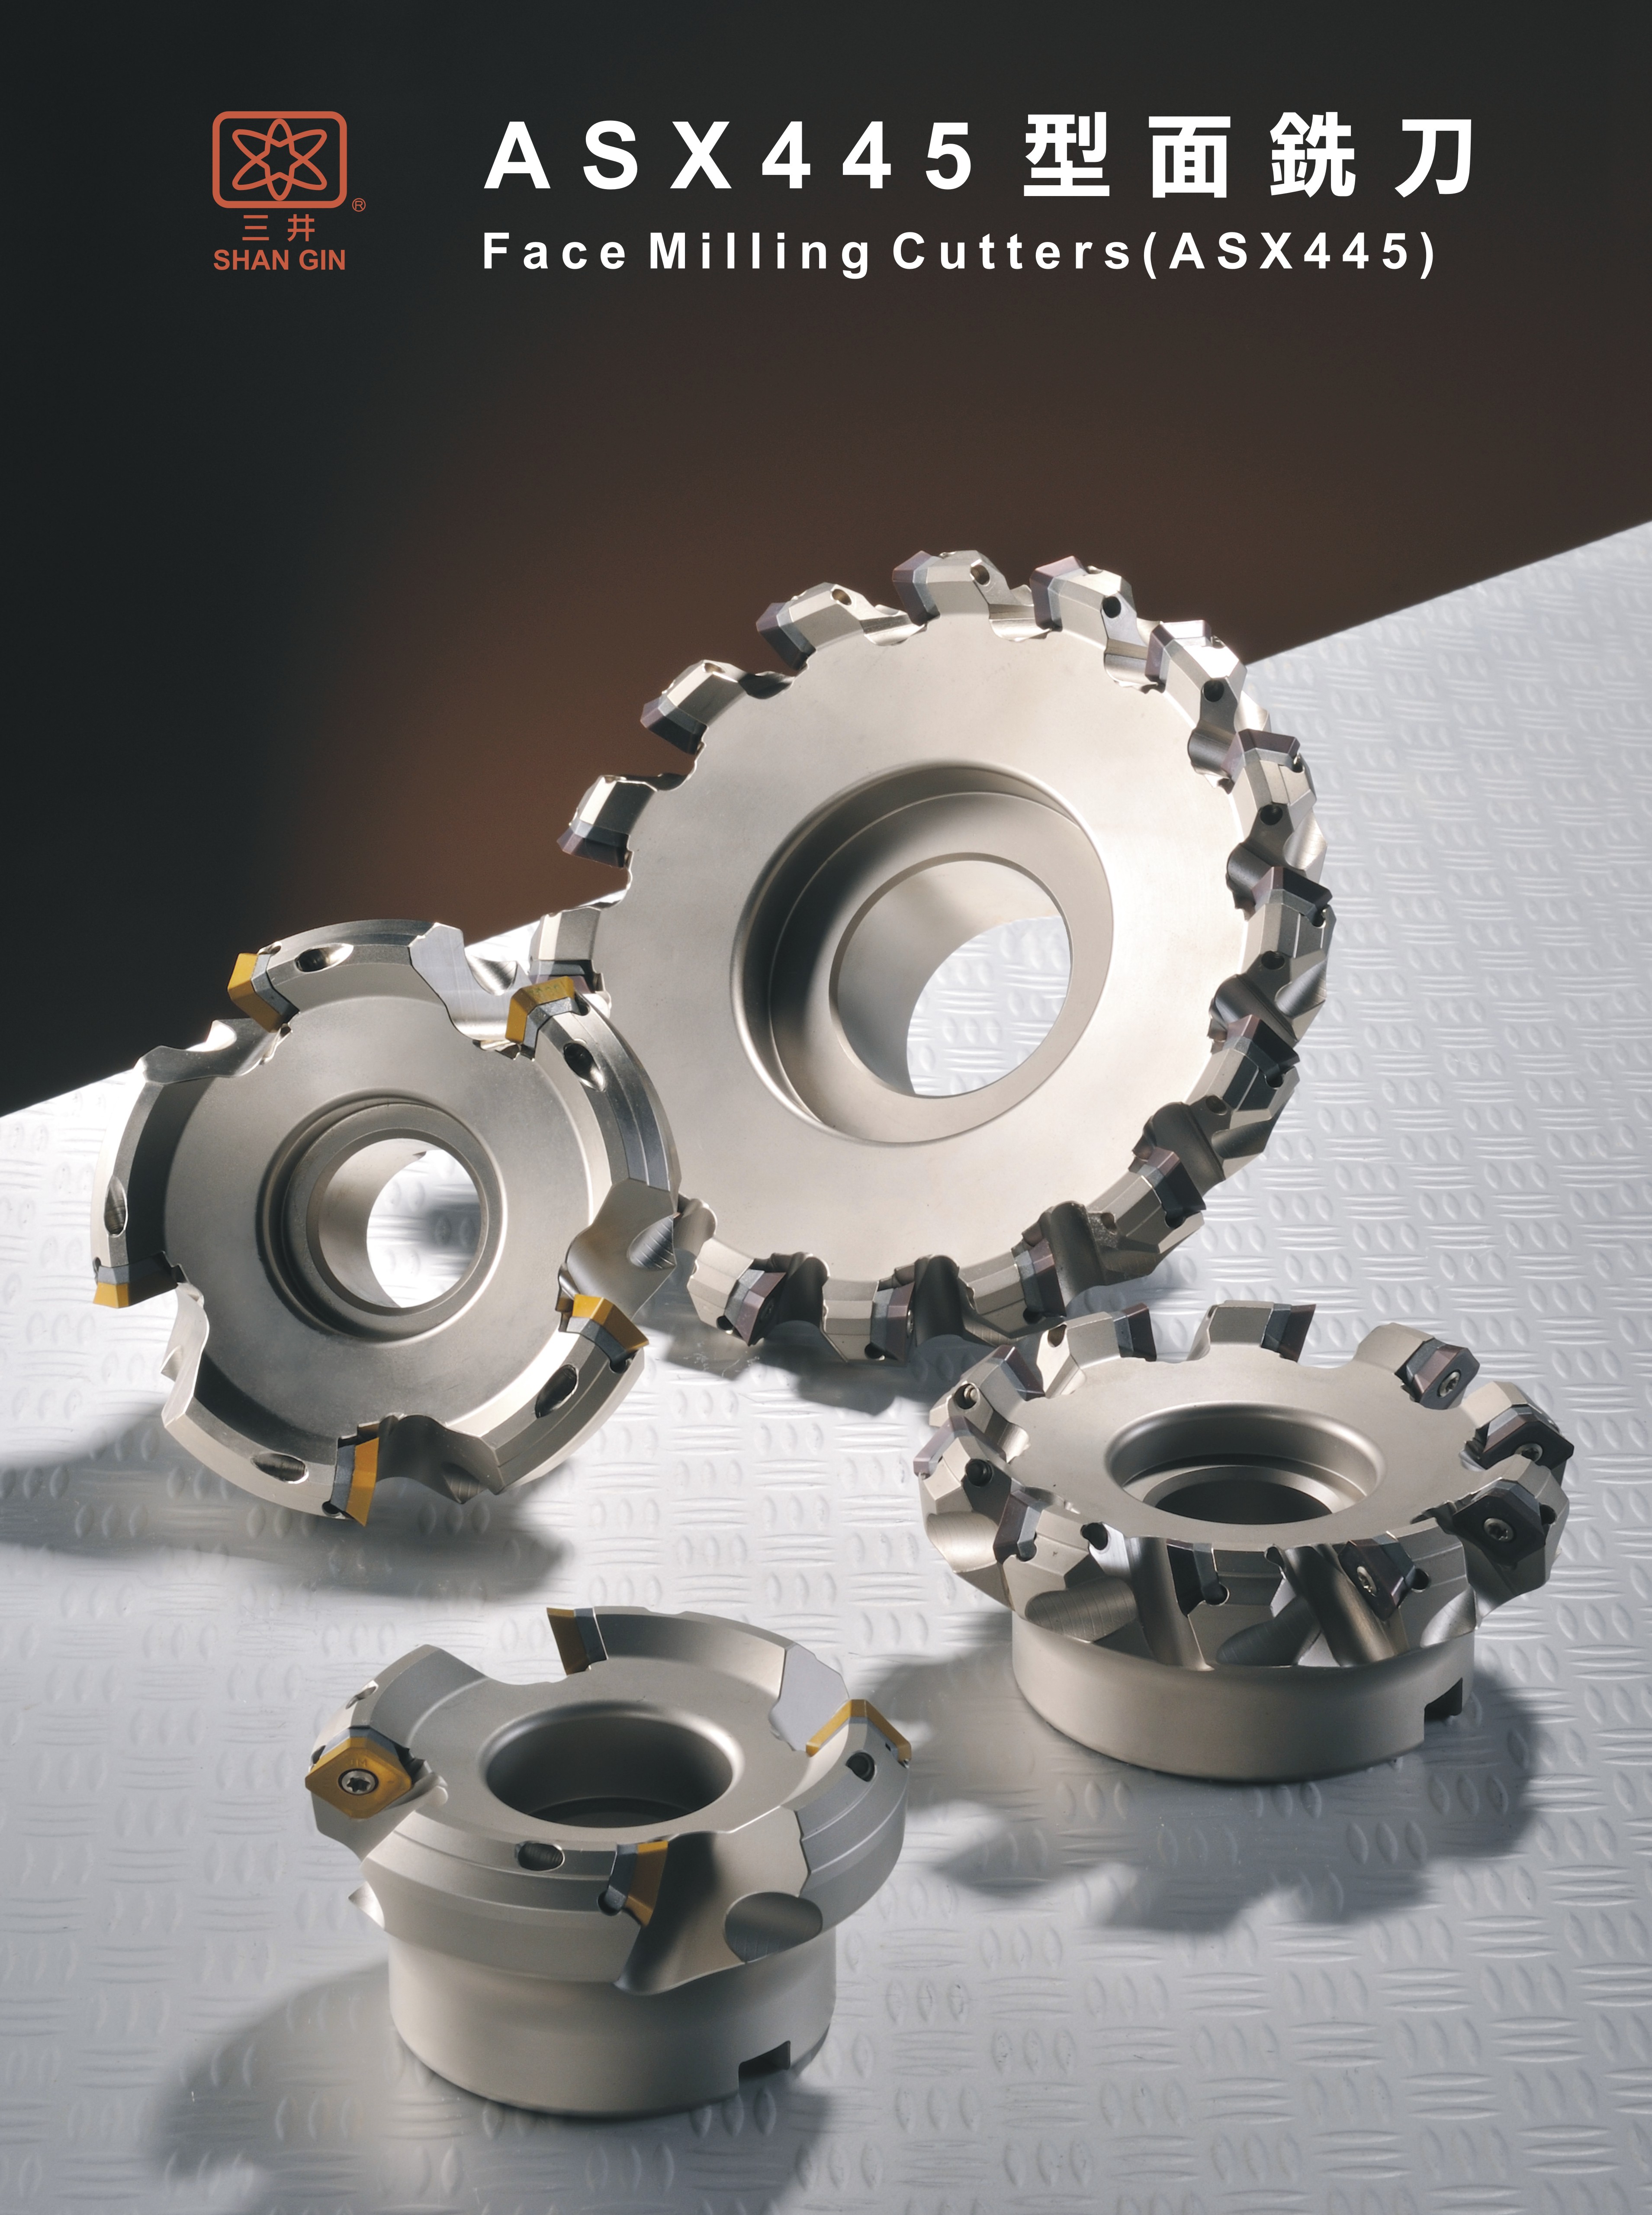 Catalog|Face Milling Cutters (ASX445)